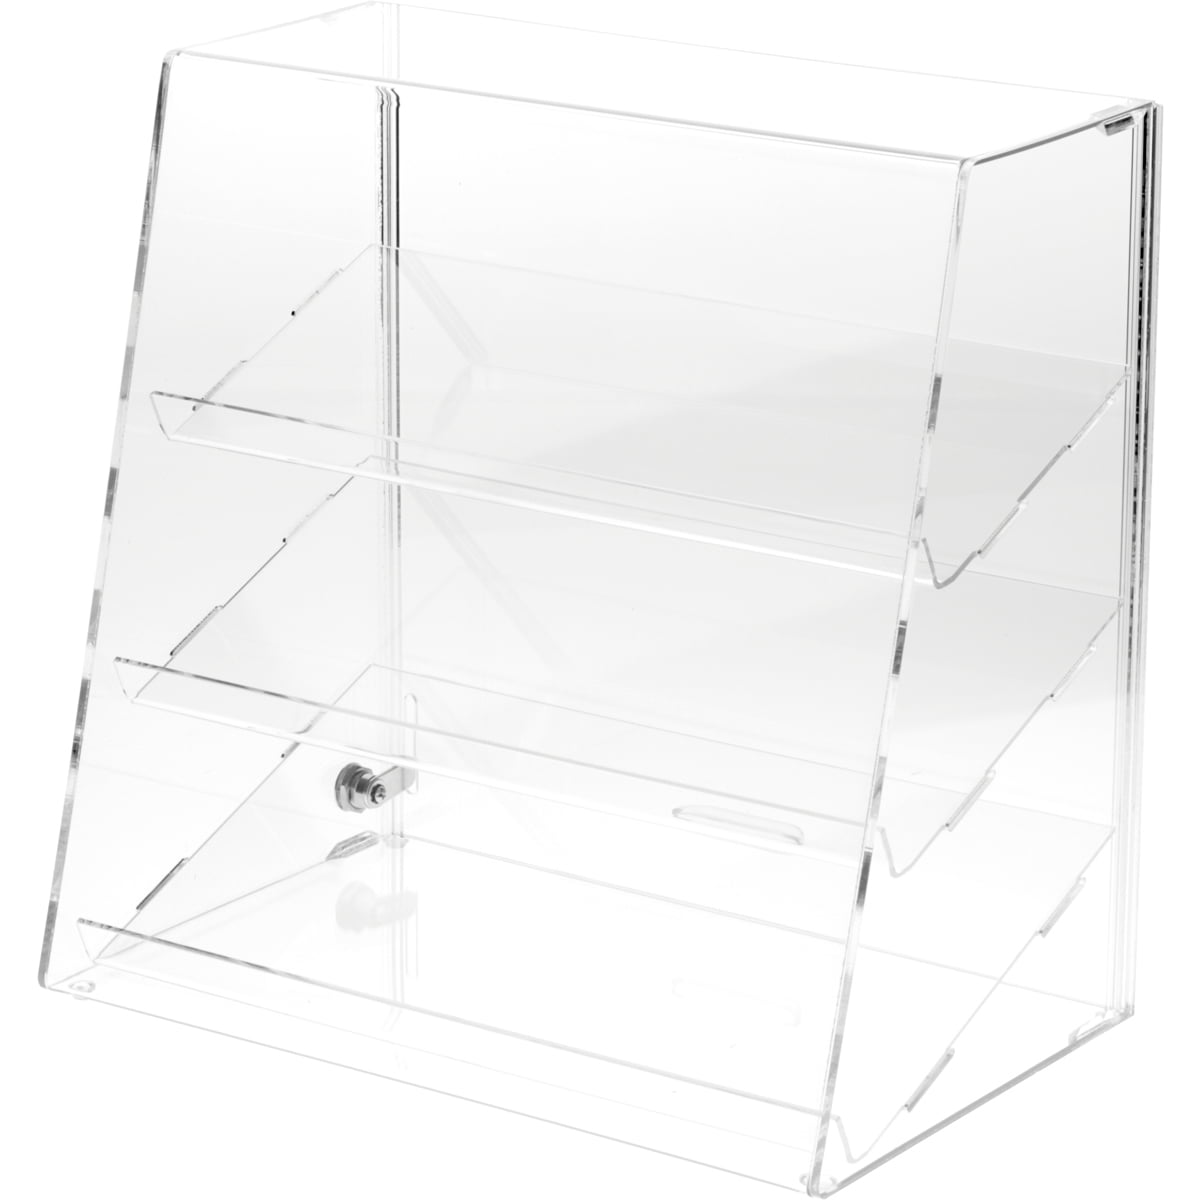 FREE SHIPPING 16"x16" Locking Display Case with Hinged Front Doors & Shelves 